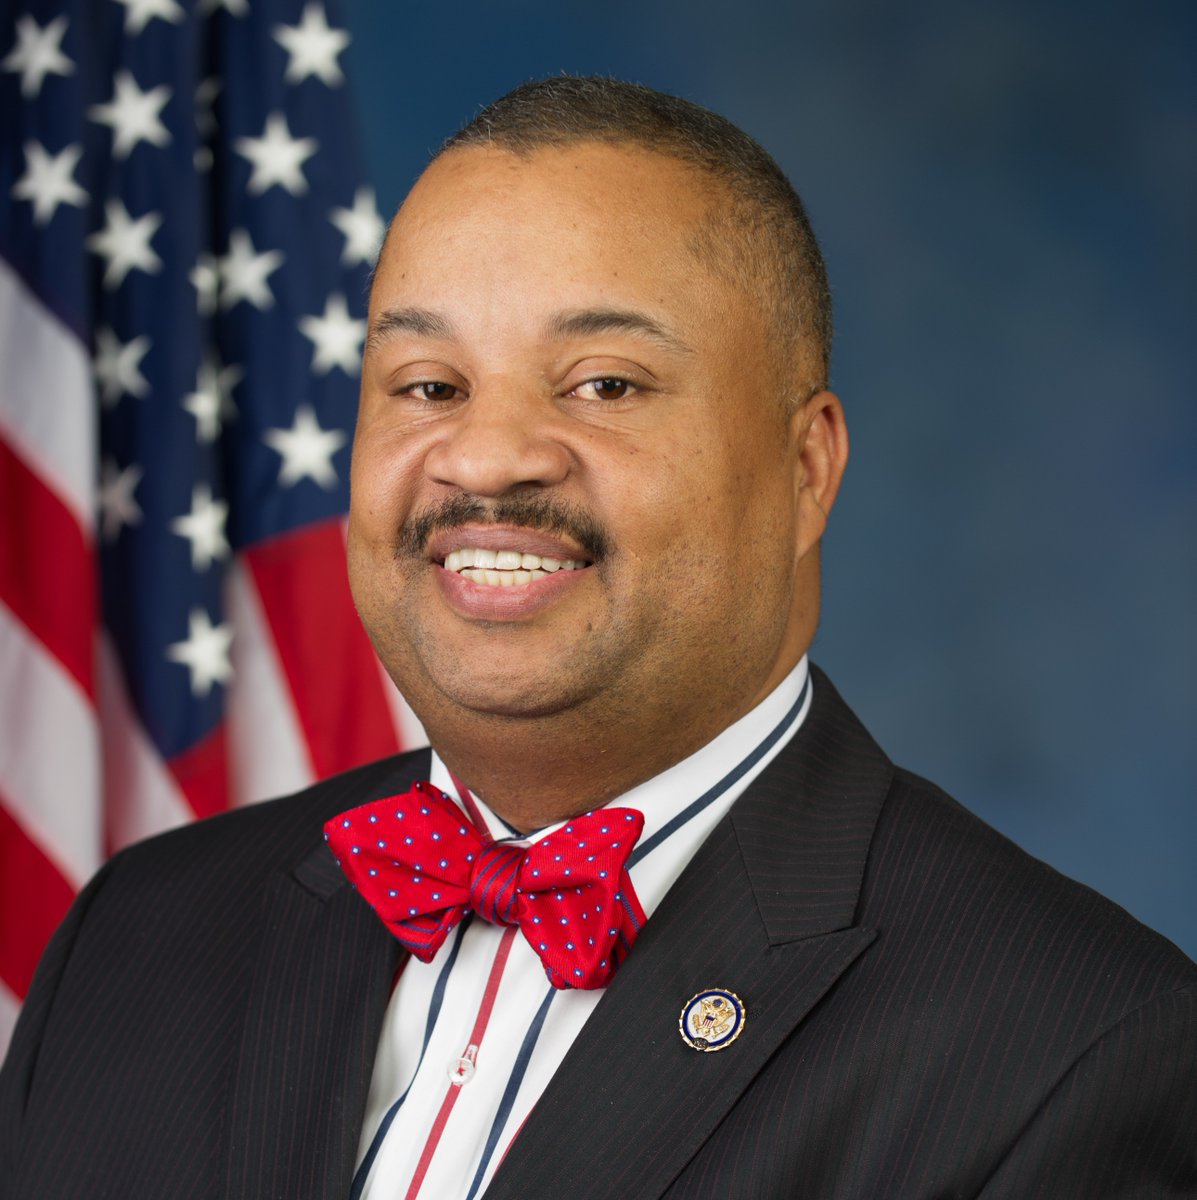 Last Respects for Congressman Payne, Jr.- The Congressman will be lying in state in Newark on Wednesday. LYING IN STATE - Wed., May 1: 12 p.m. - 12 a.m. Essex County Historic Courthouse 470 Dr. Martin Luther King, Jr. Blvd. Newark, NJ Please stop by if it is convenient.